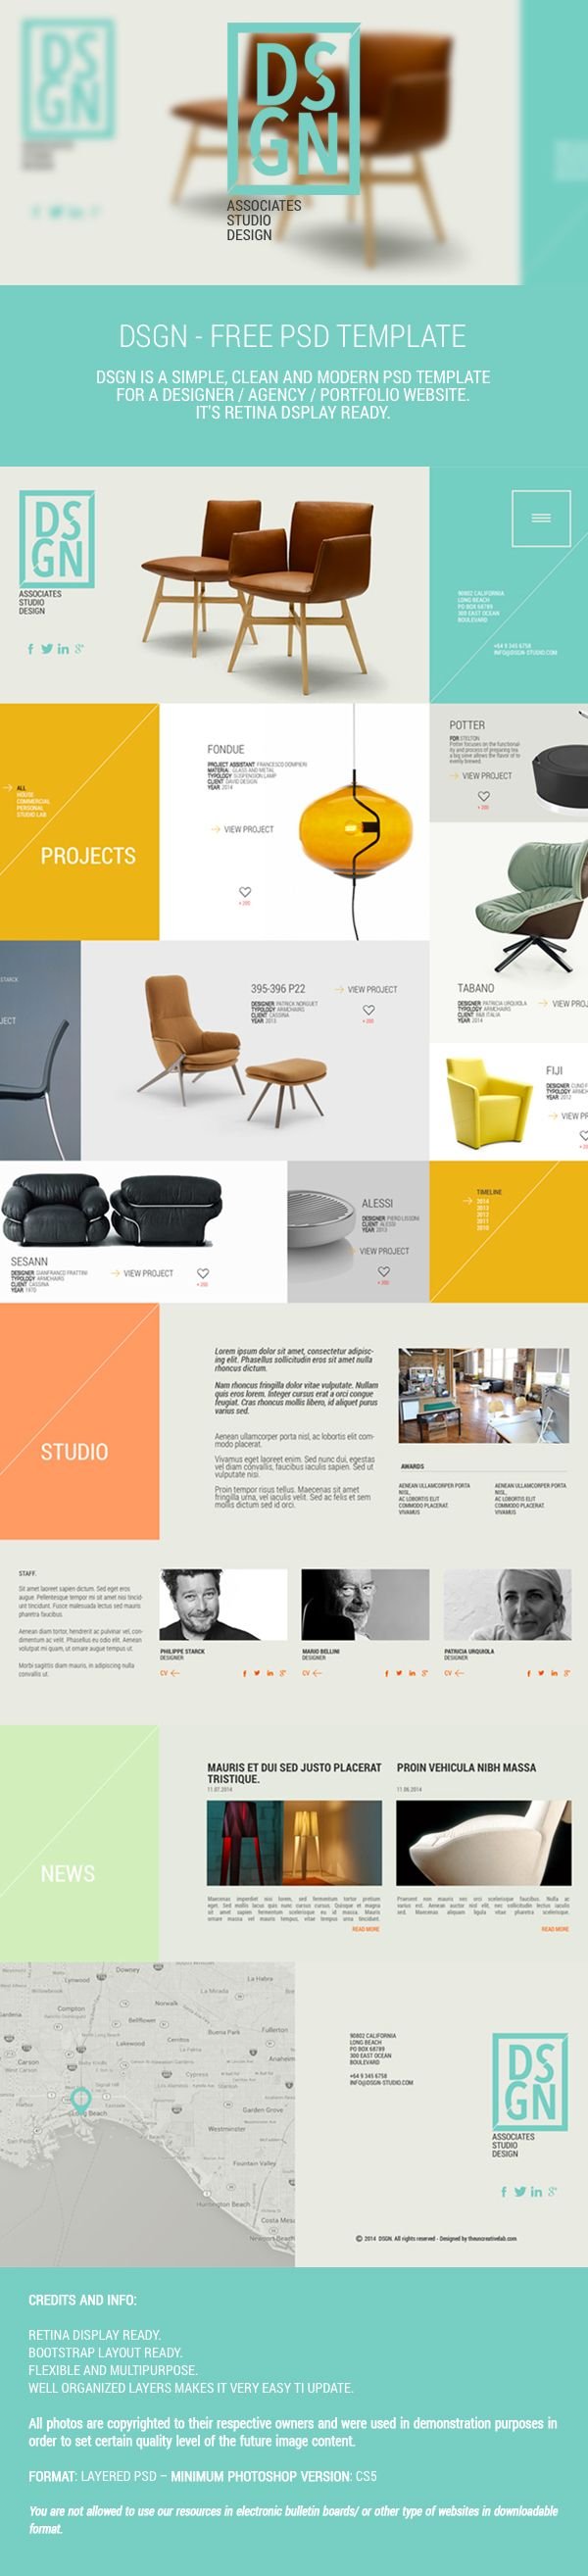 DSGN - Free .PSD Template by michele cialone